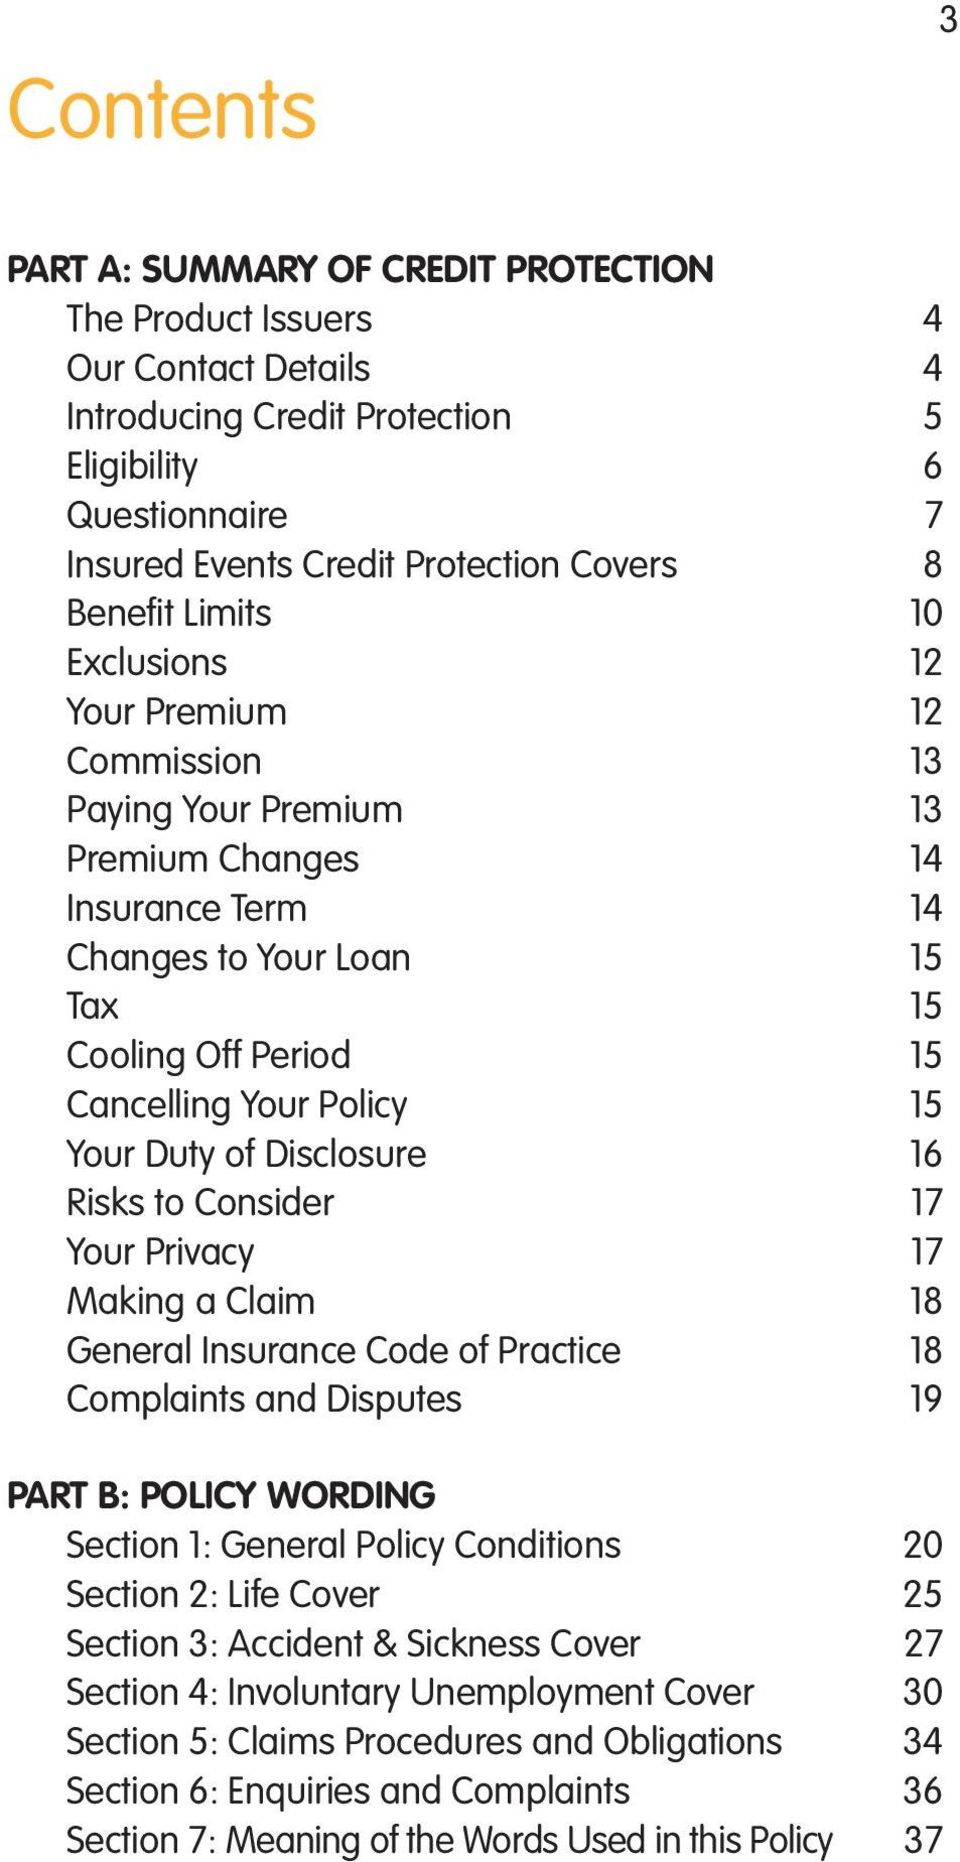 15 Your Duty of Disclosure 16 Risks to Consider 17 Your Privacy 17 Making a Claim 18 General Insurance Code of Practice 18 Complaints and Disputes 19 Part B: Policy Wording Section 1: General Policy